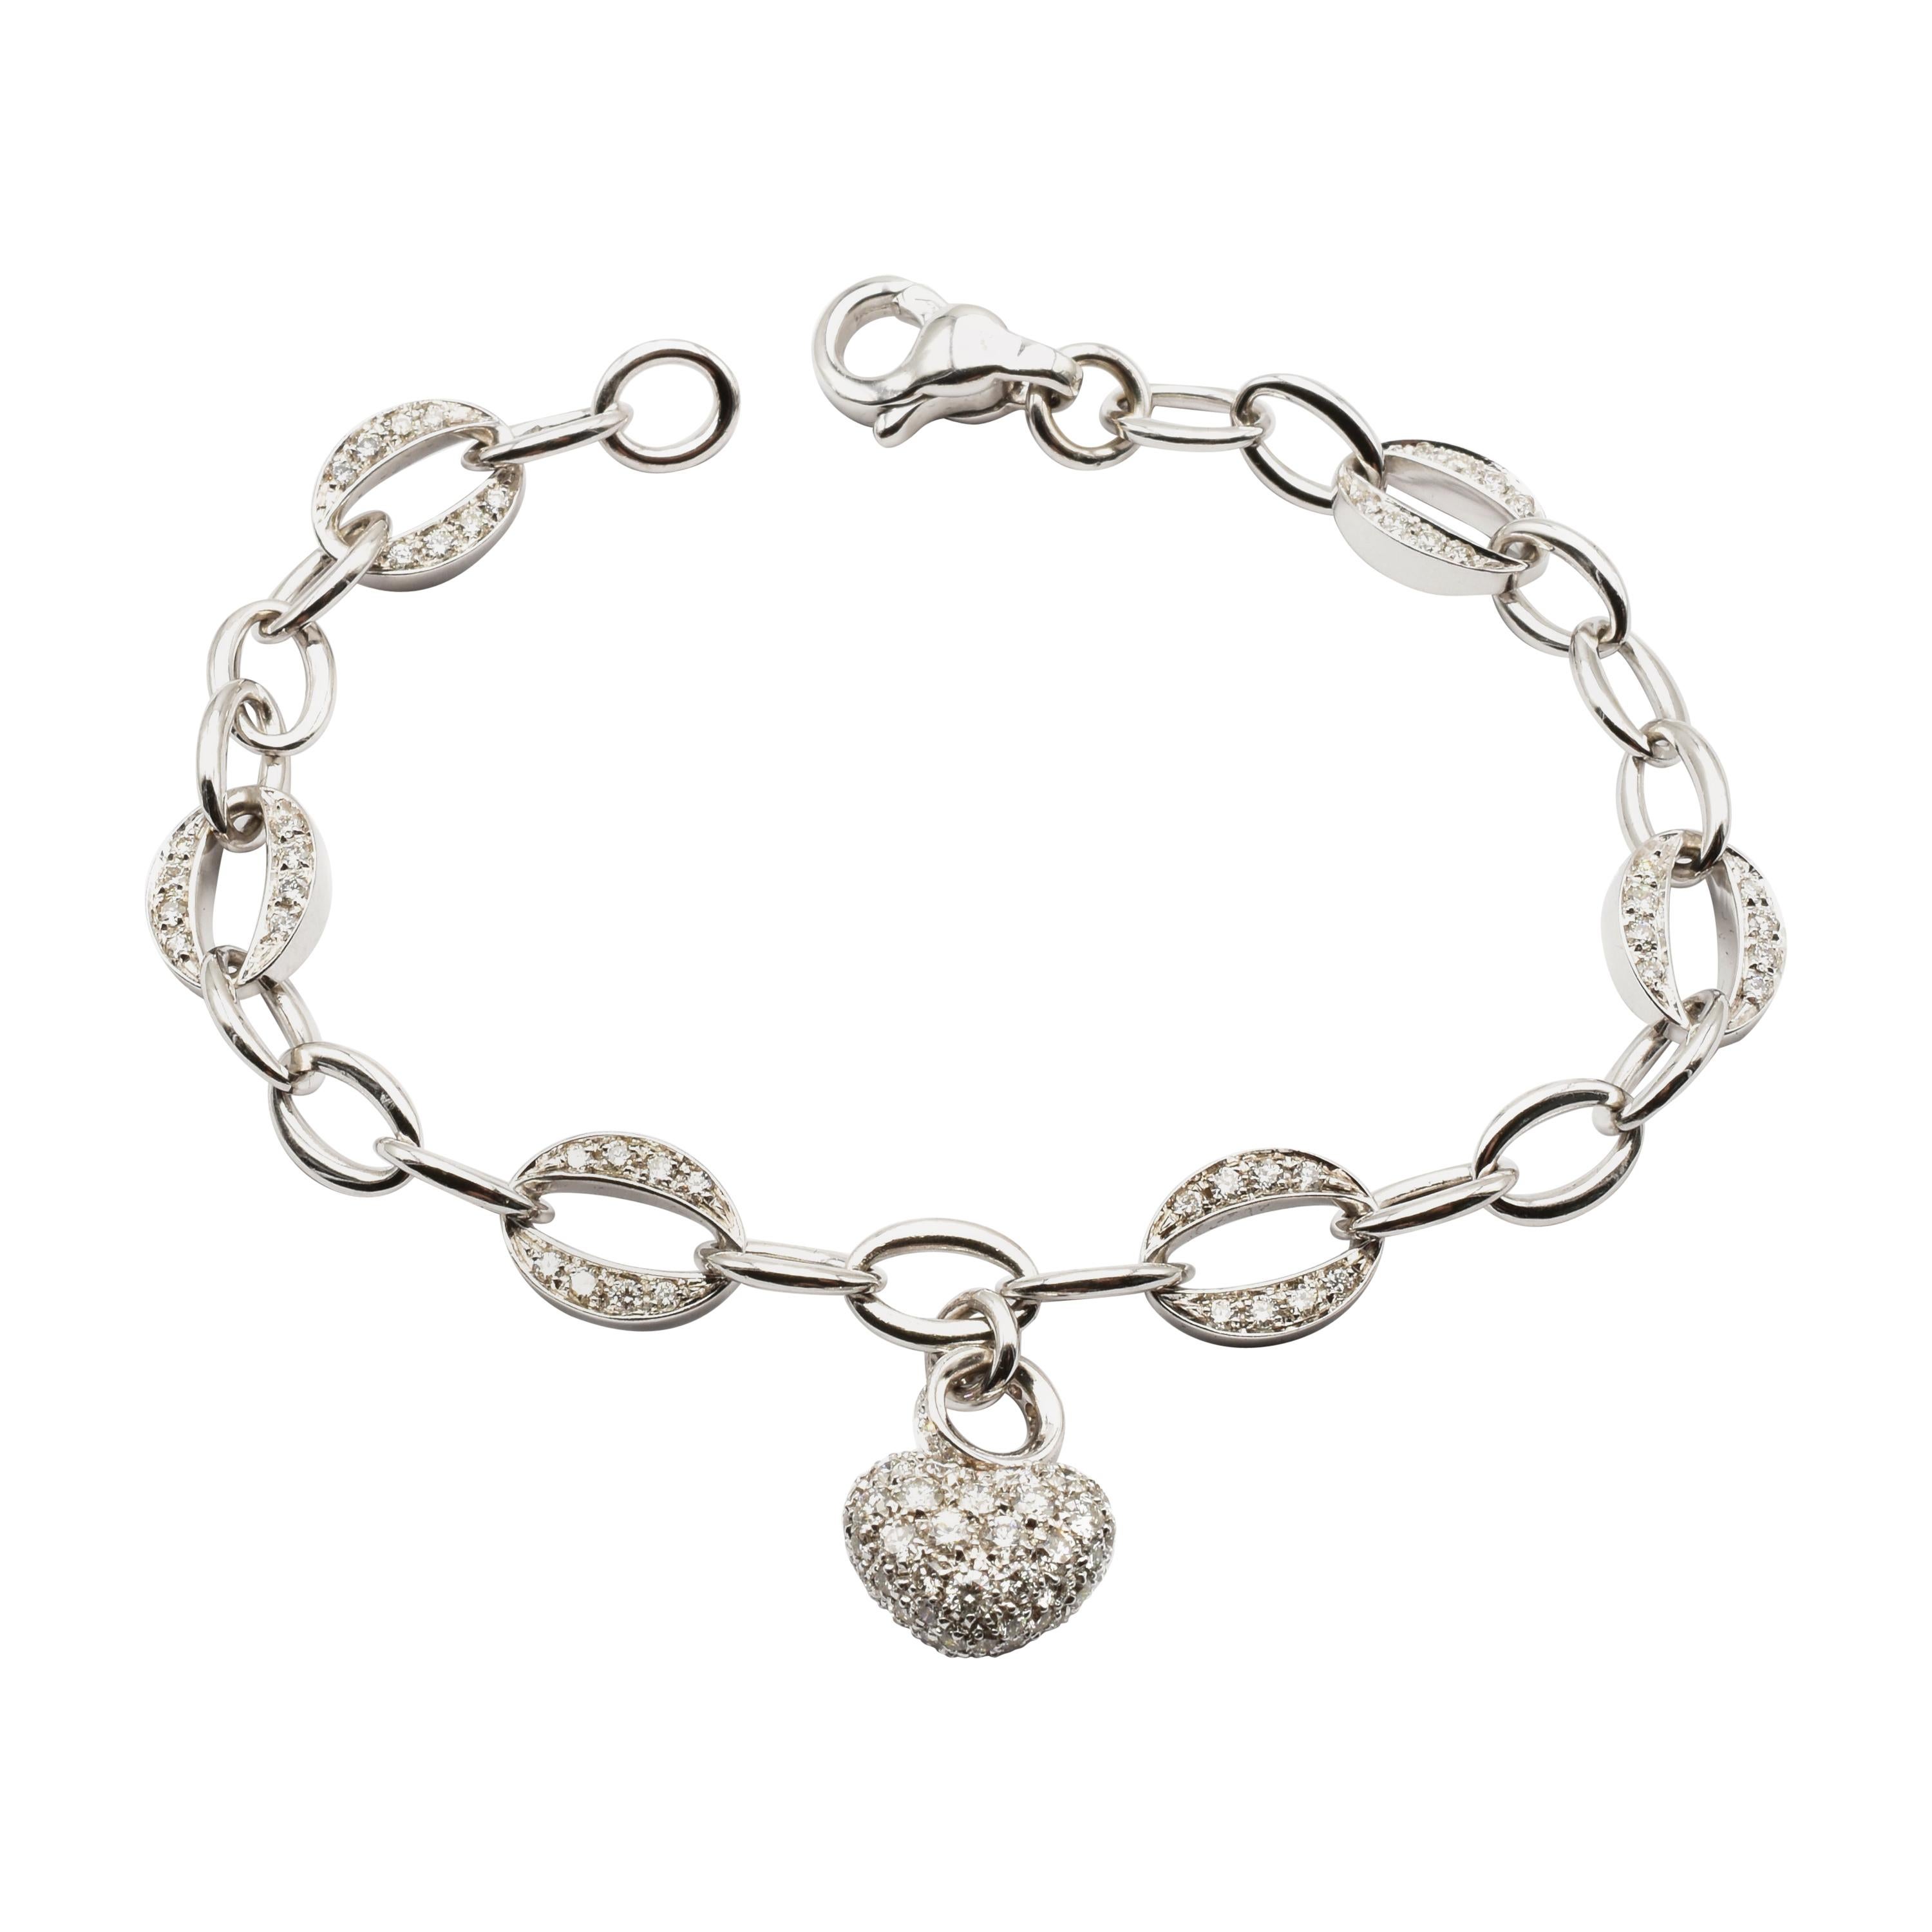 White Gold Heart Charm Bracelet with Diamonds Made in Italy For Sale